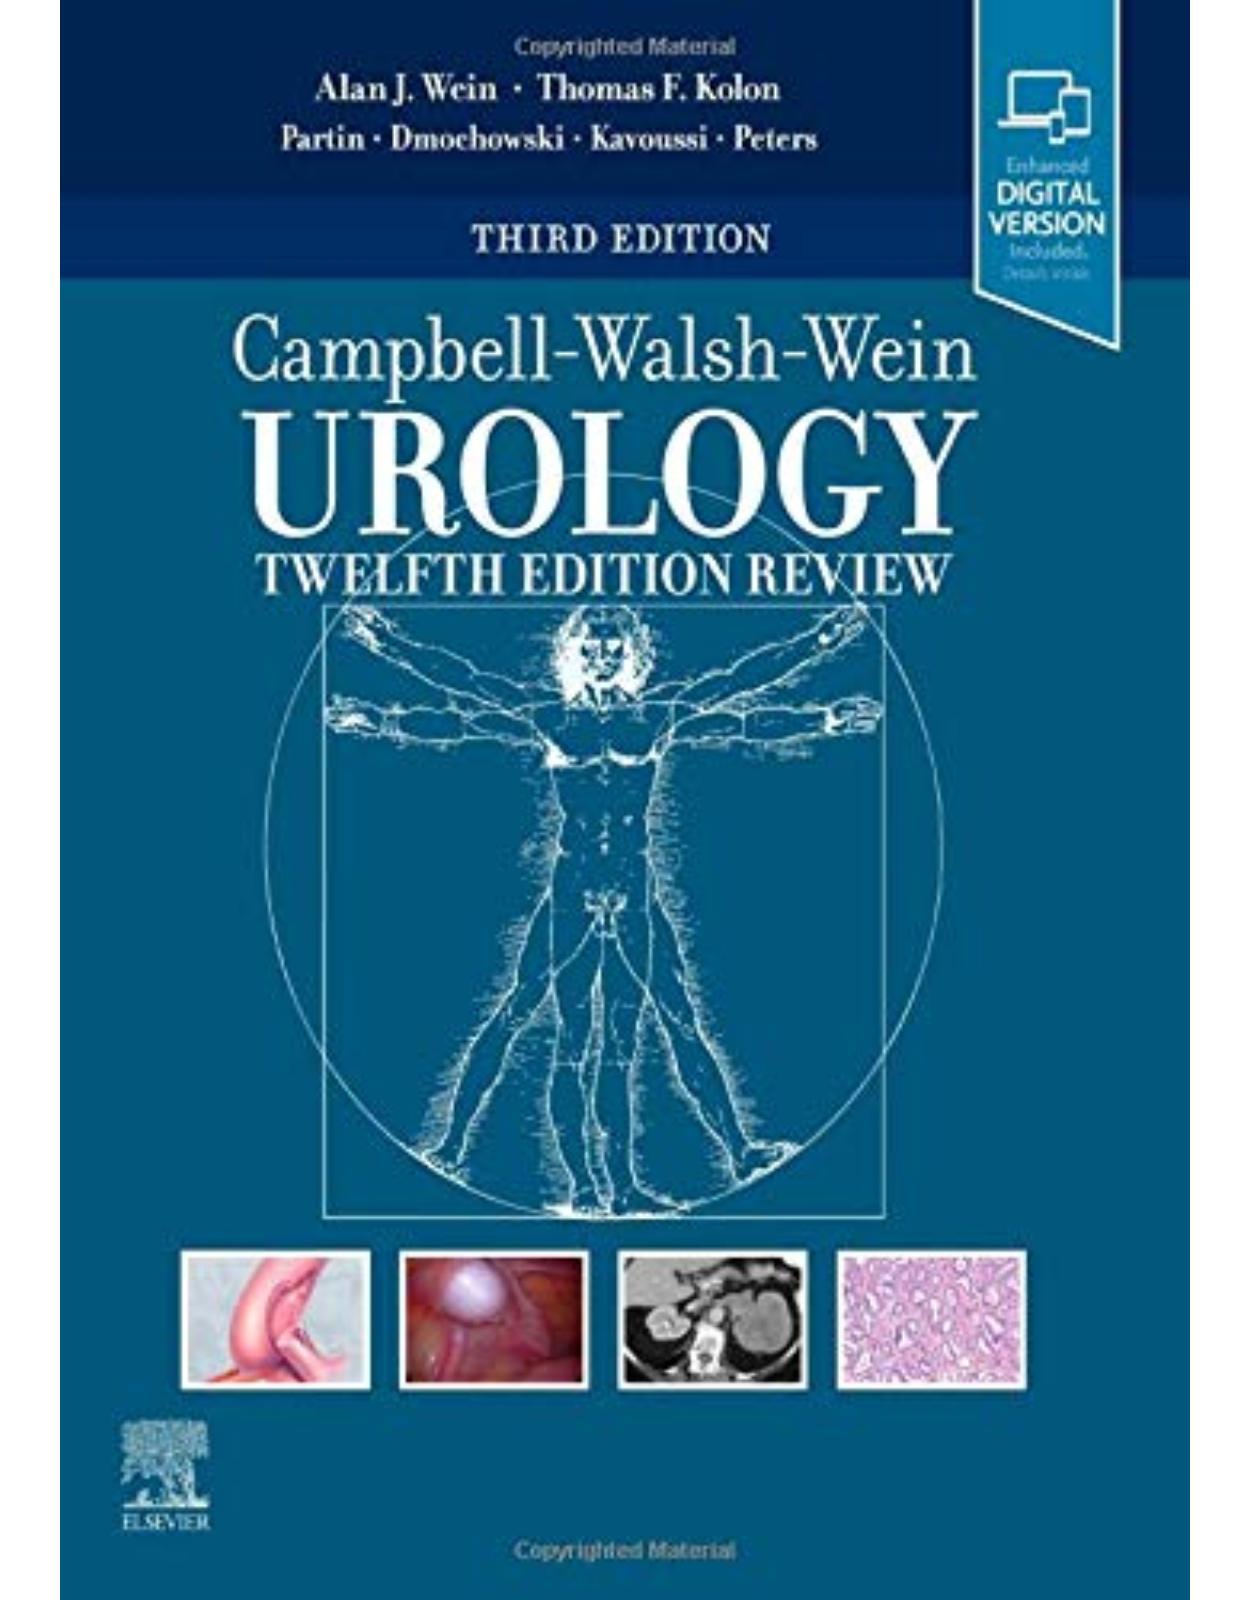 Campbell-Walsh Urology 12th Edition Review